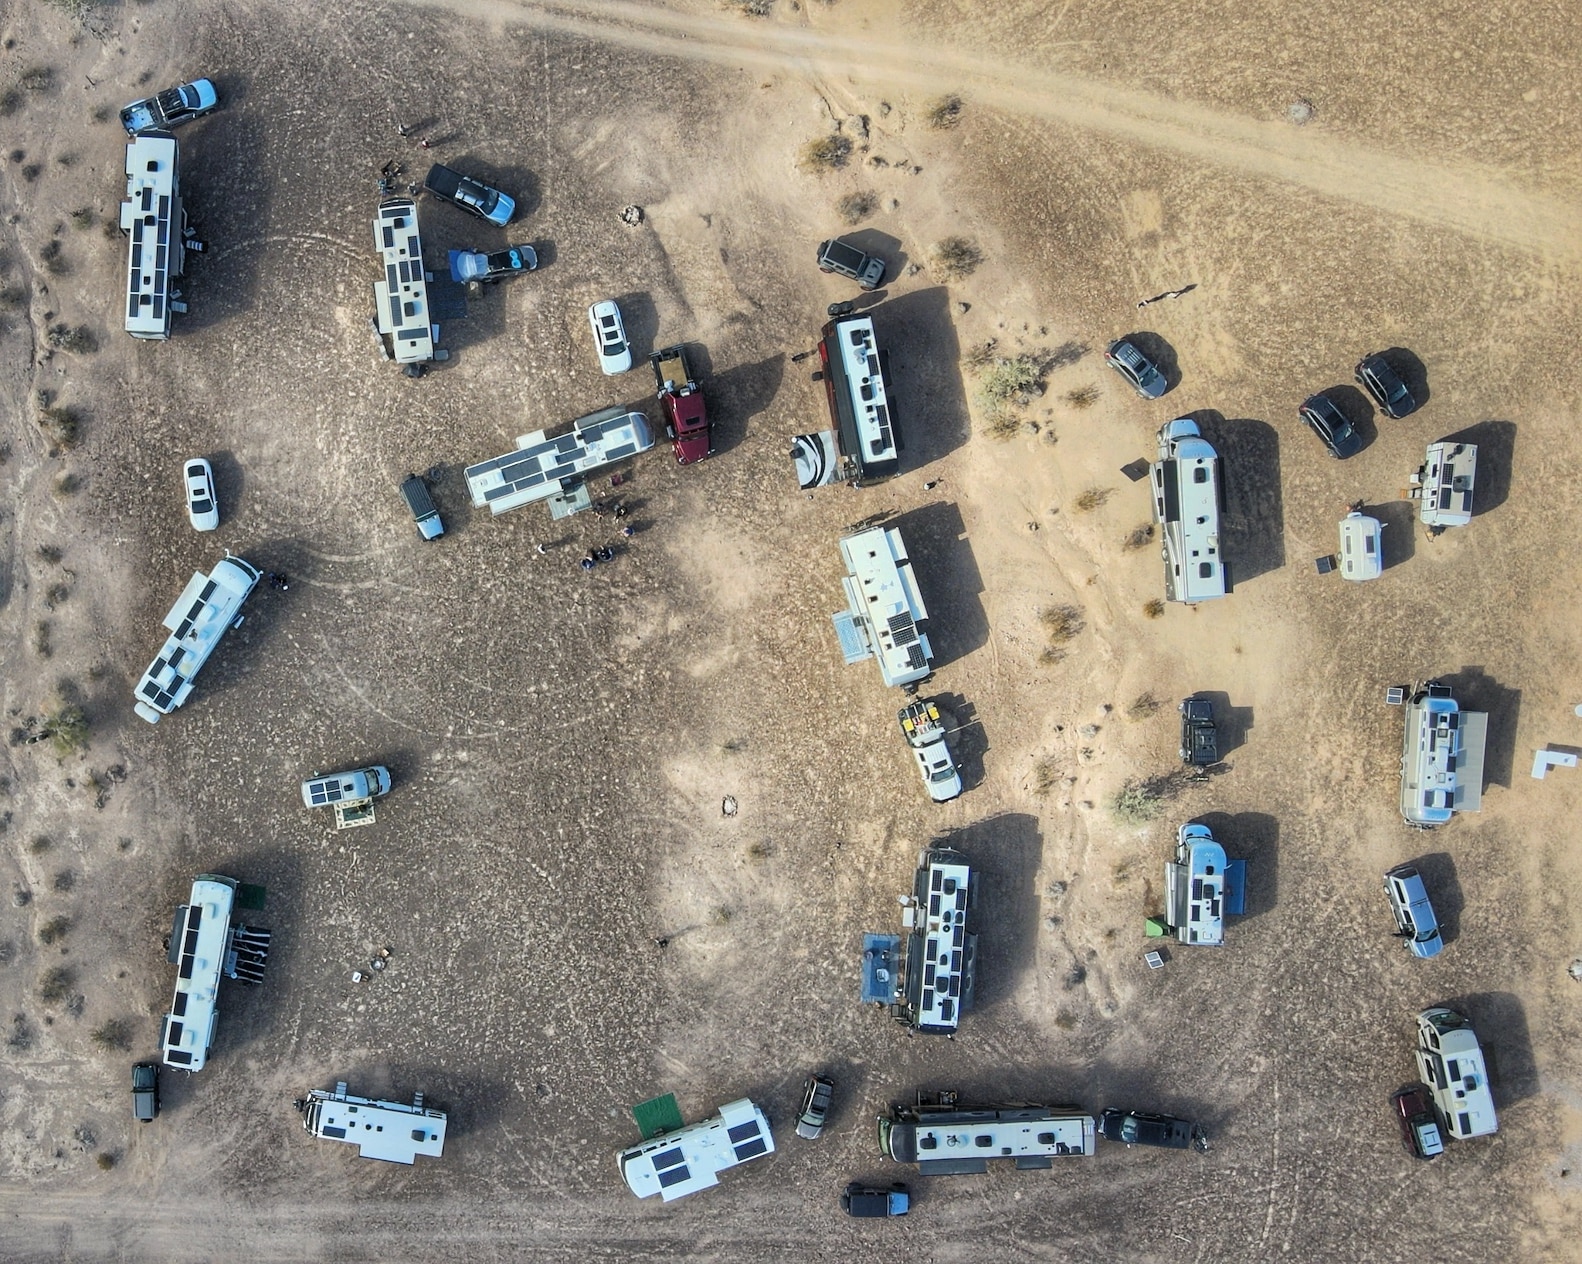 Ariel view of group of RVs parked in circle